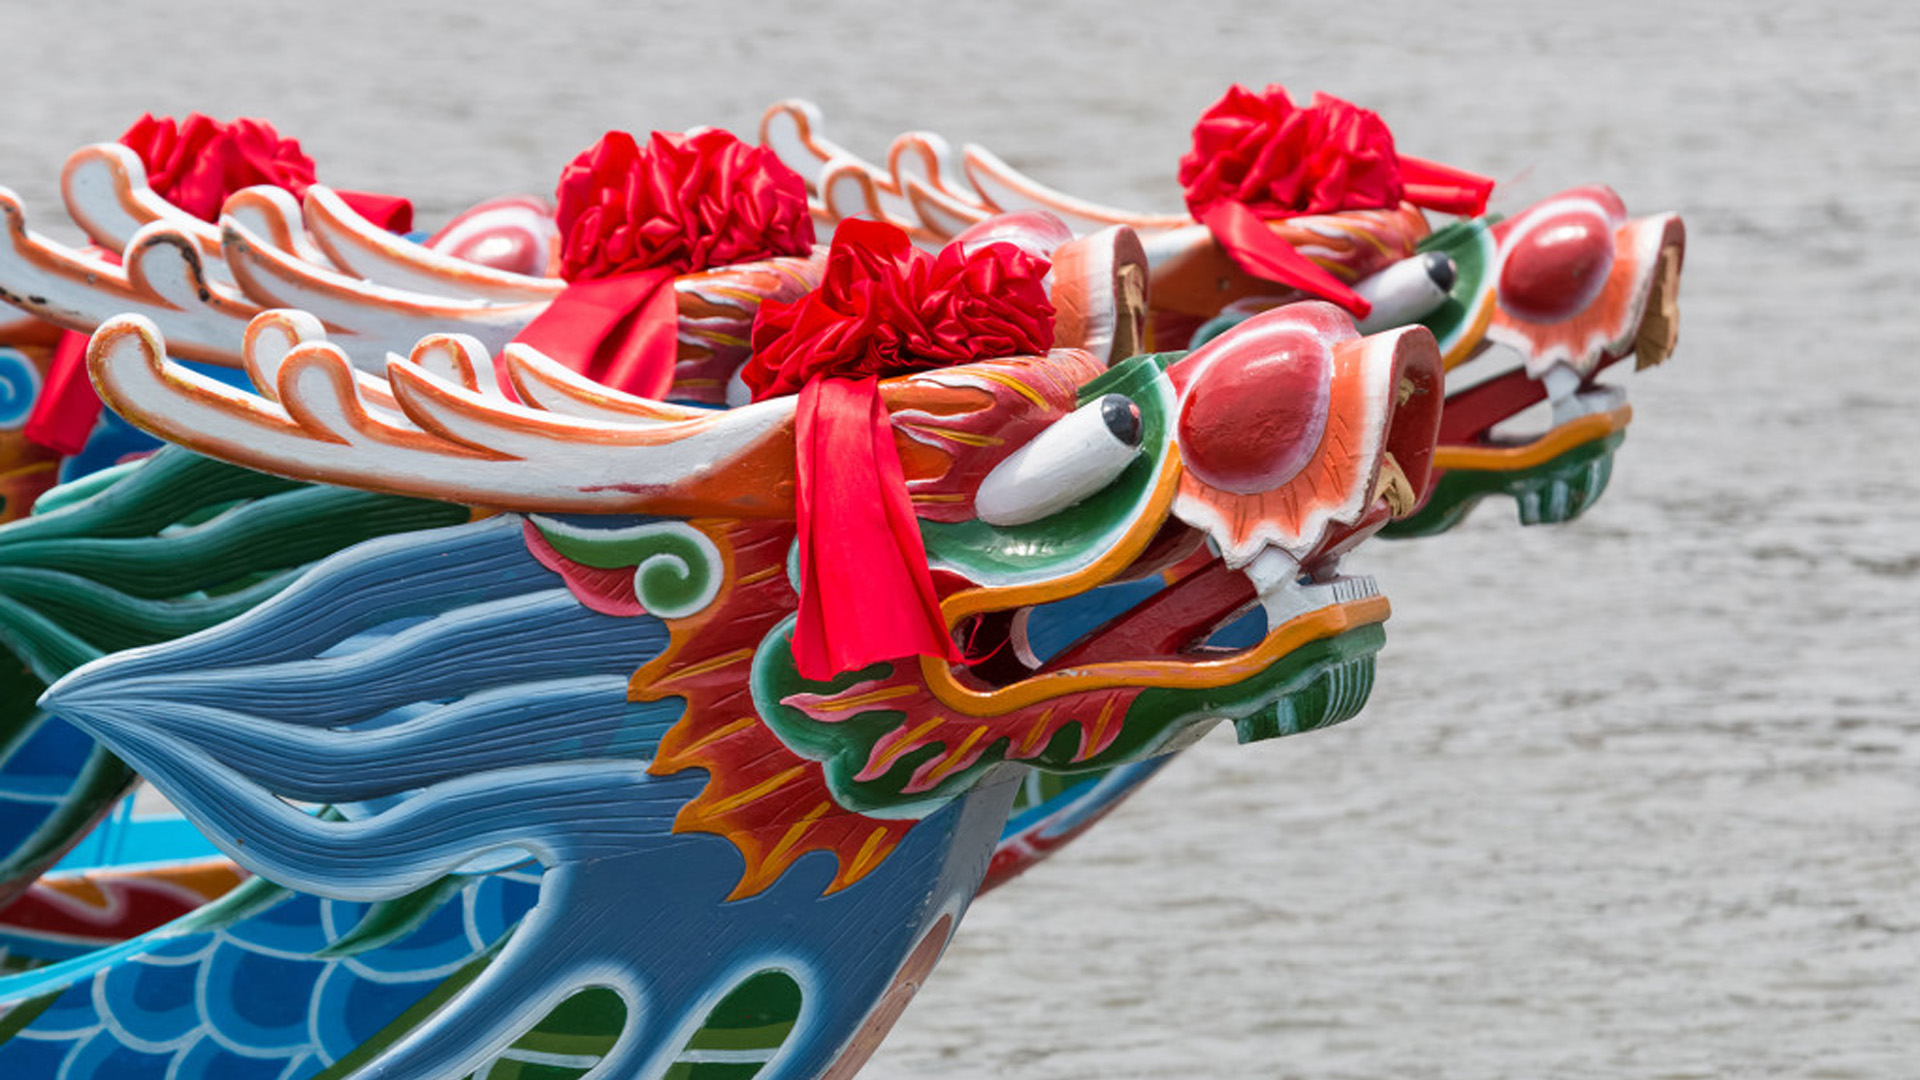 The head of a boat from the Dragon Boat Race. It is a blue and red dragon's head in traditional Chinese ornament.